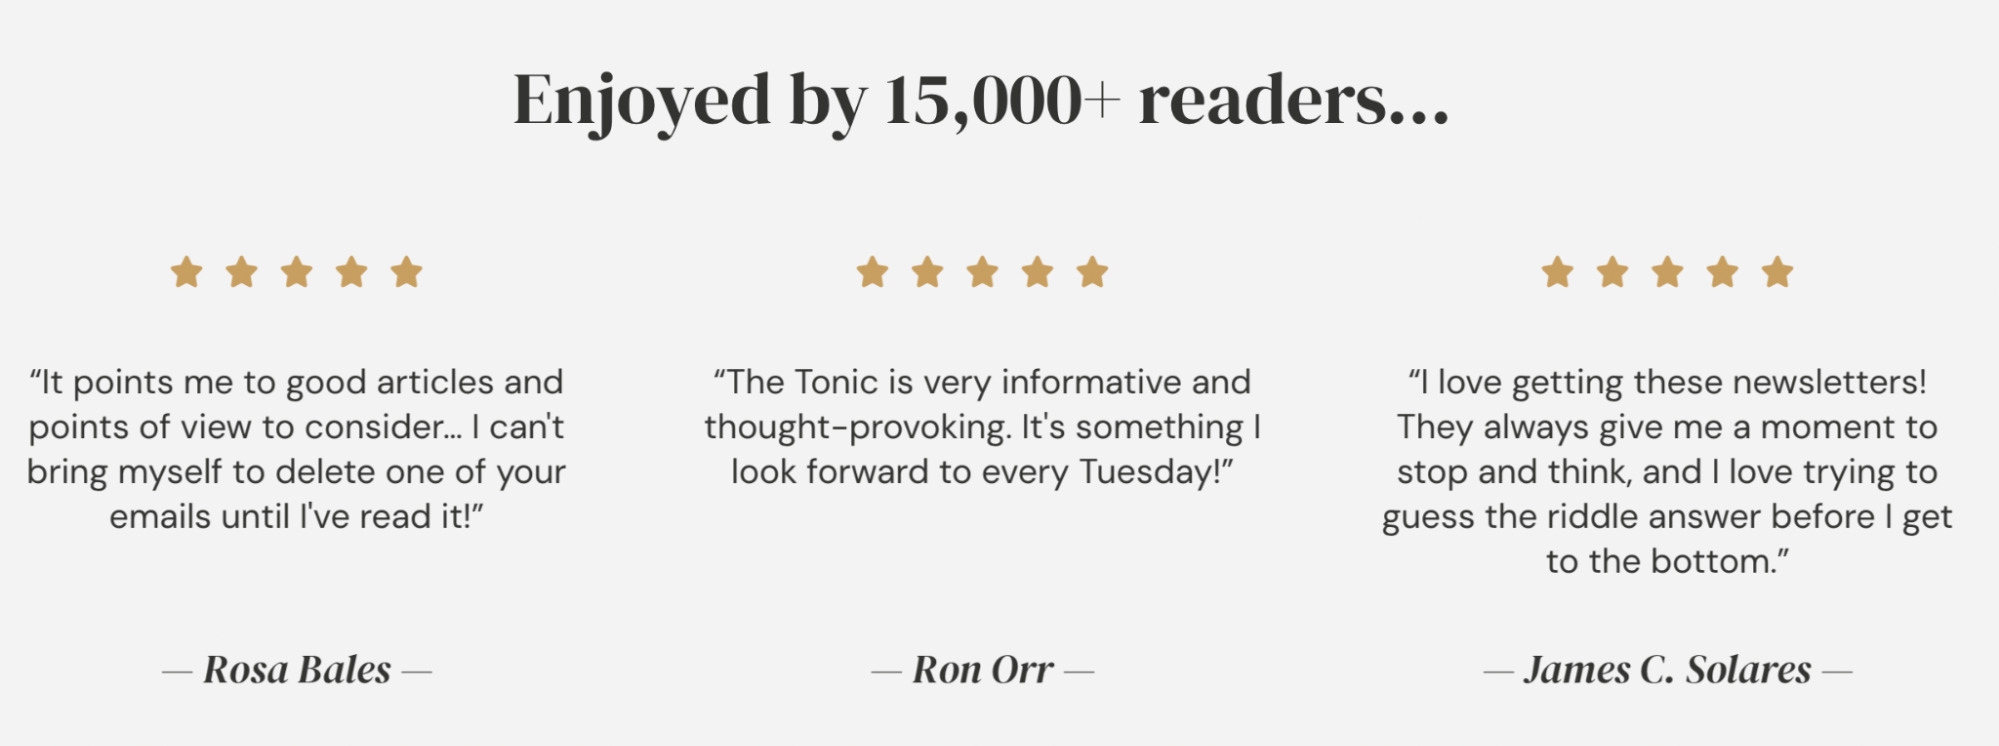 The Tonic reader reviews